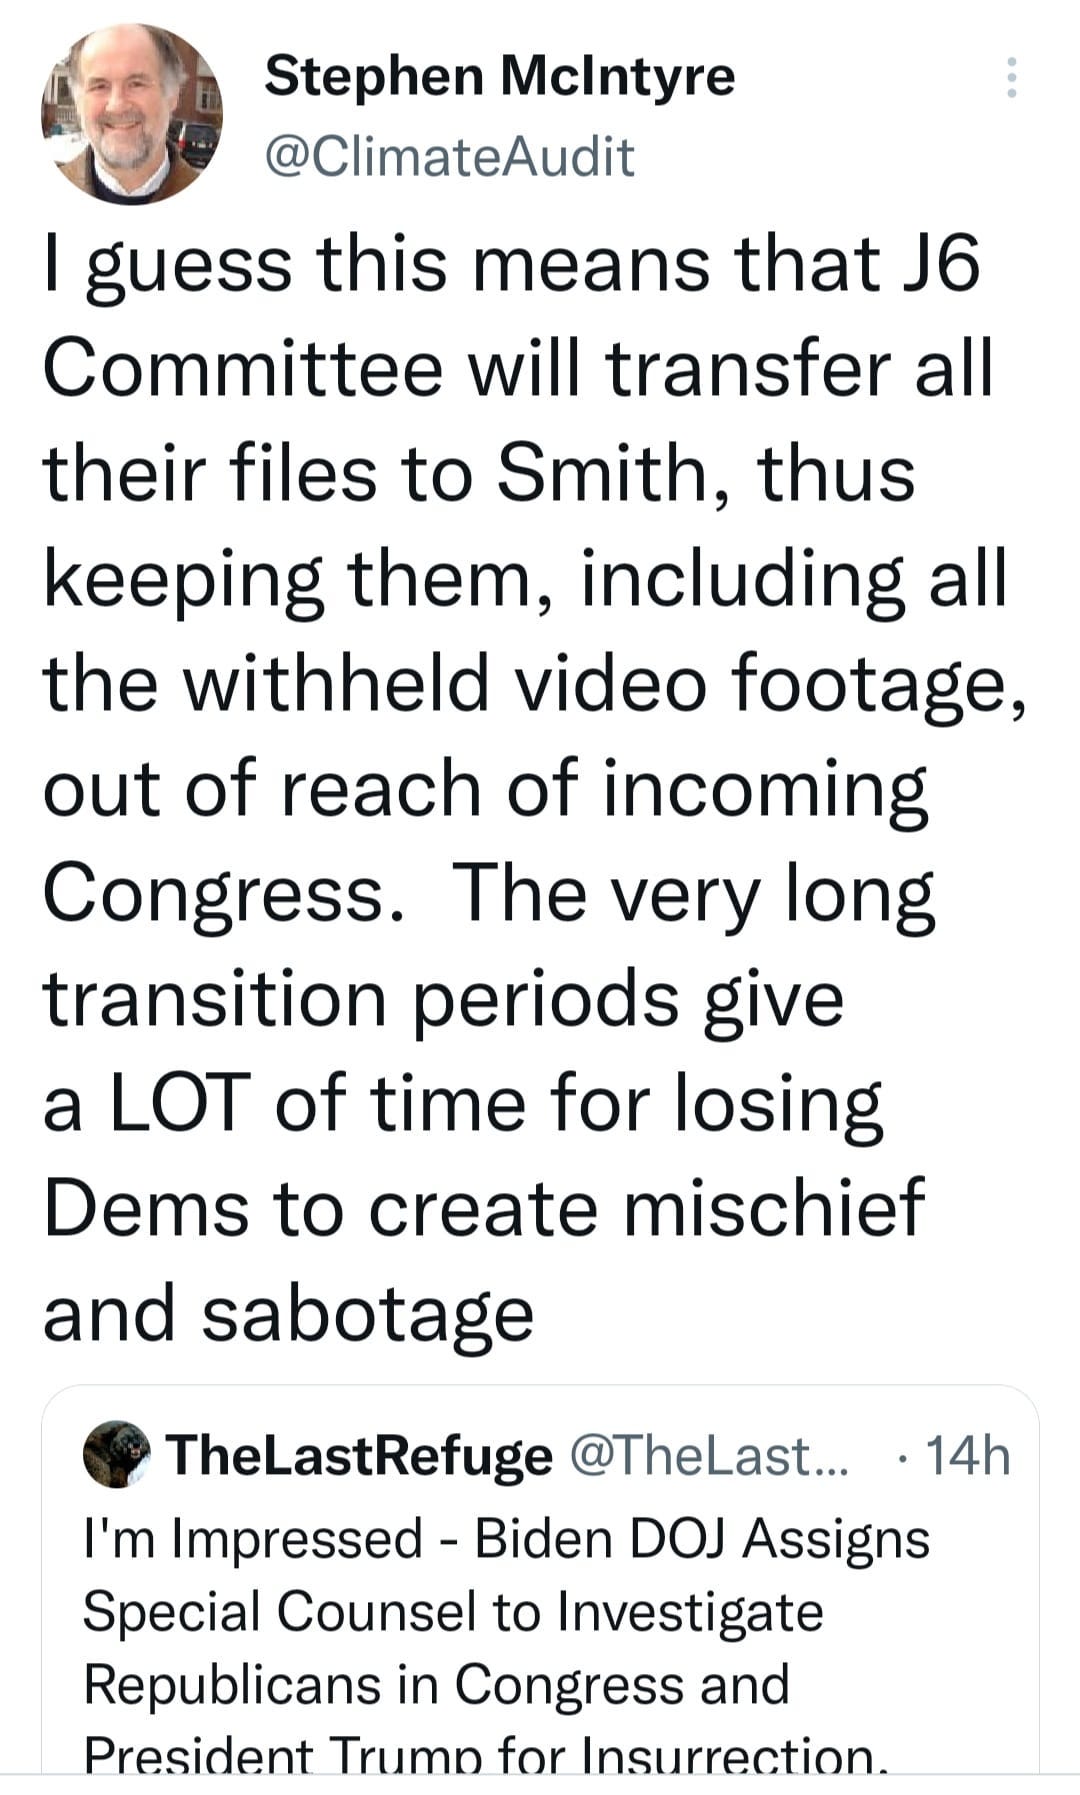 May be an image of 1 person and text that says 'Stephen Mclntyre @ClimateAudit I guess this means that J6 Committee will transfer all their files to Smith, thus keeping them, including all the withheld video footage, out of reach of incoming Congress. The very long transition periods give a LOT of time for losing Dems to create mischief and sabotage 14h TheLastRefuge @TheLast... I'm Impressed Biden DOJ Assigns Special Counsel to Investigate Republicans in Congress and President Trump for Insurrection.'